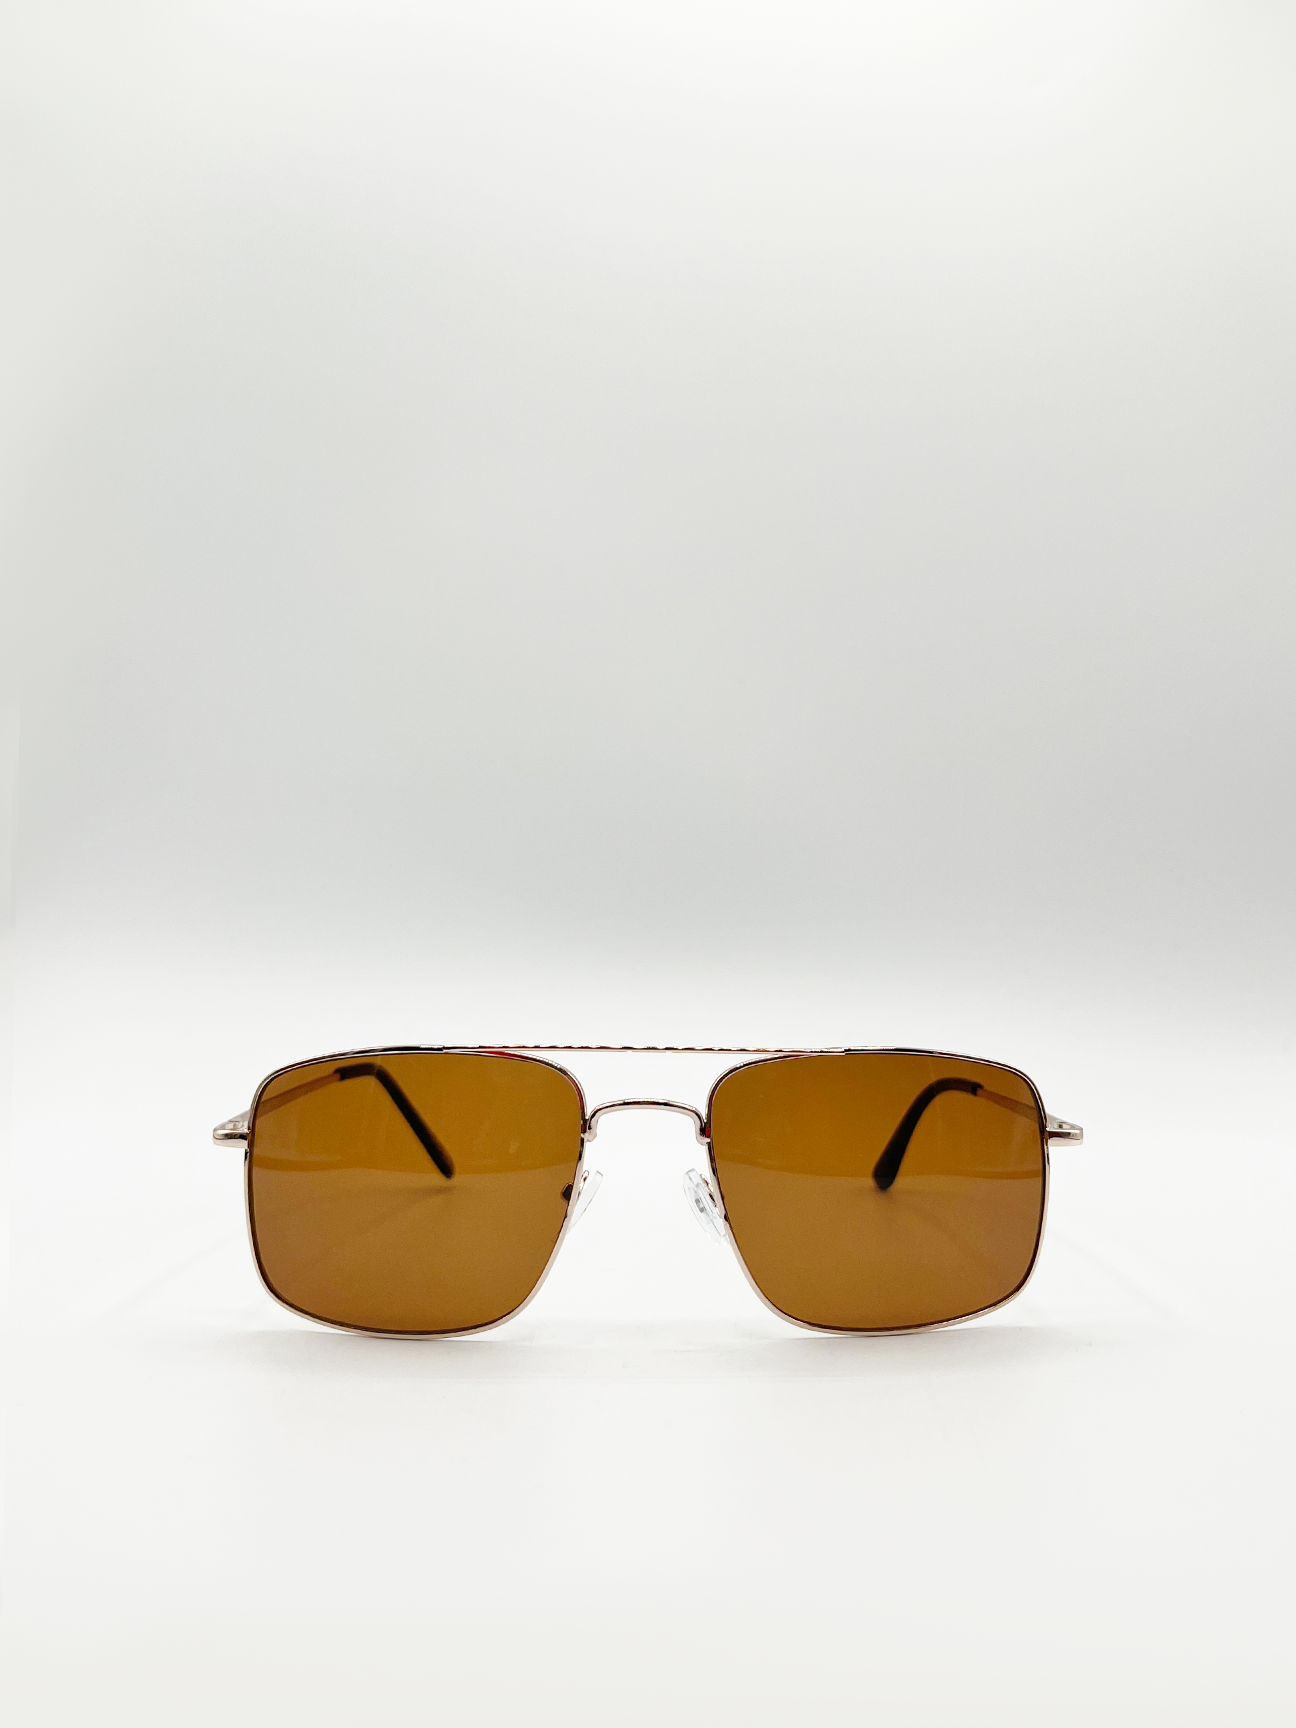 Gold Aviator Style Angular Sunglasses with Brown Lenses